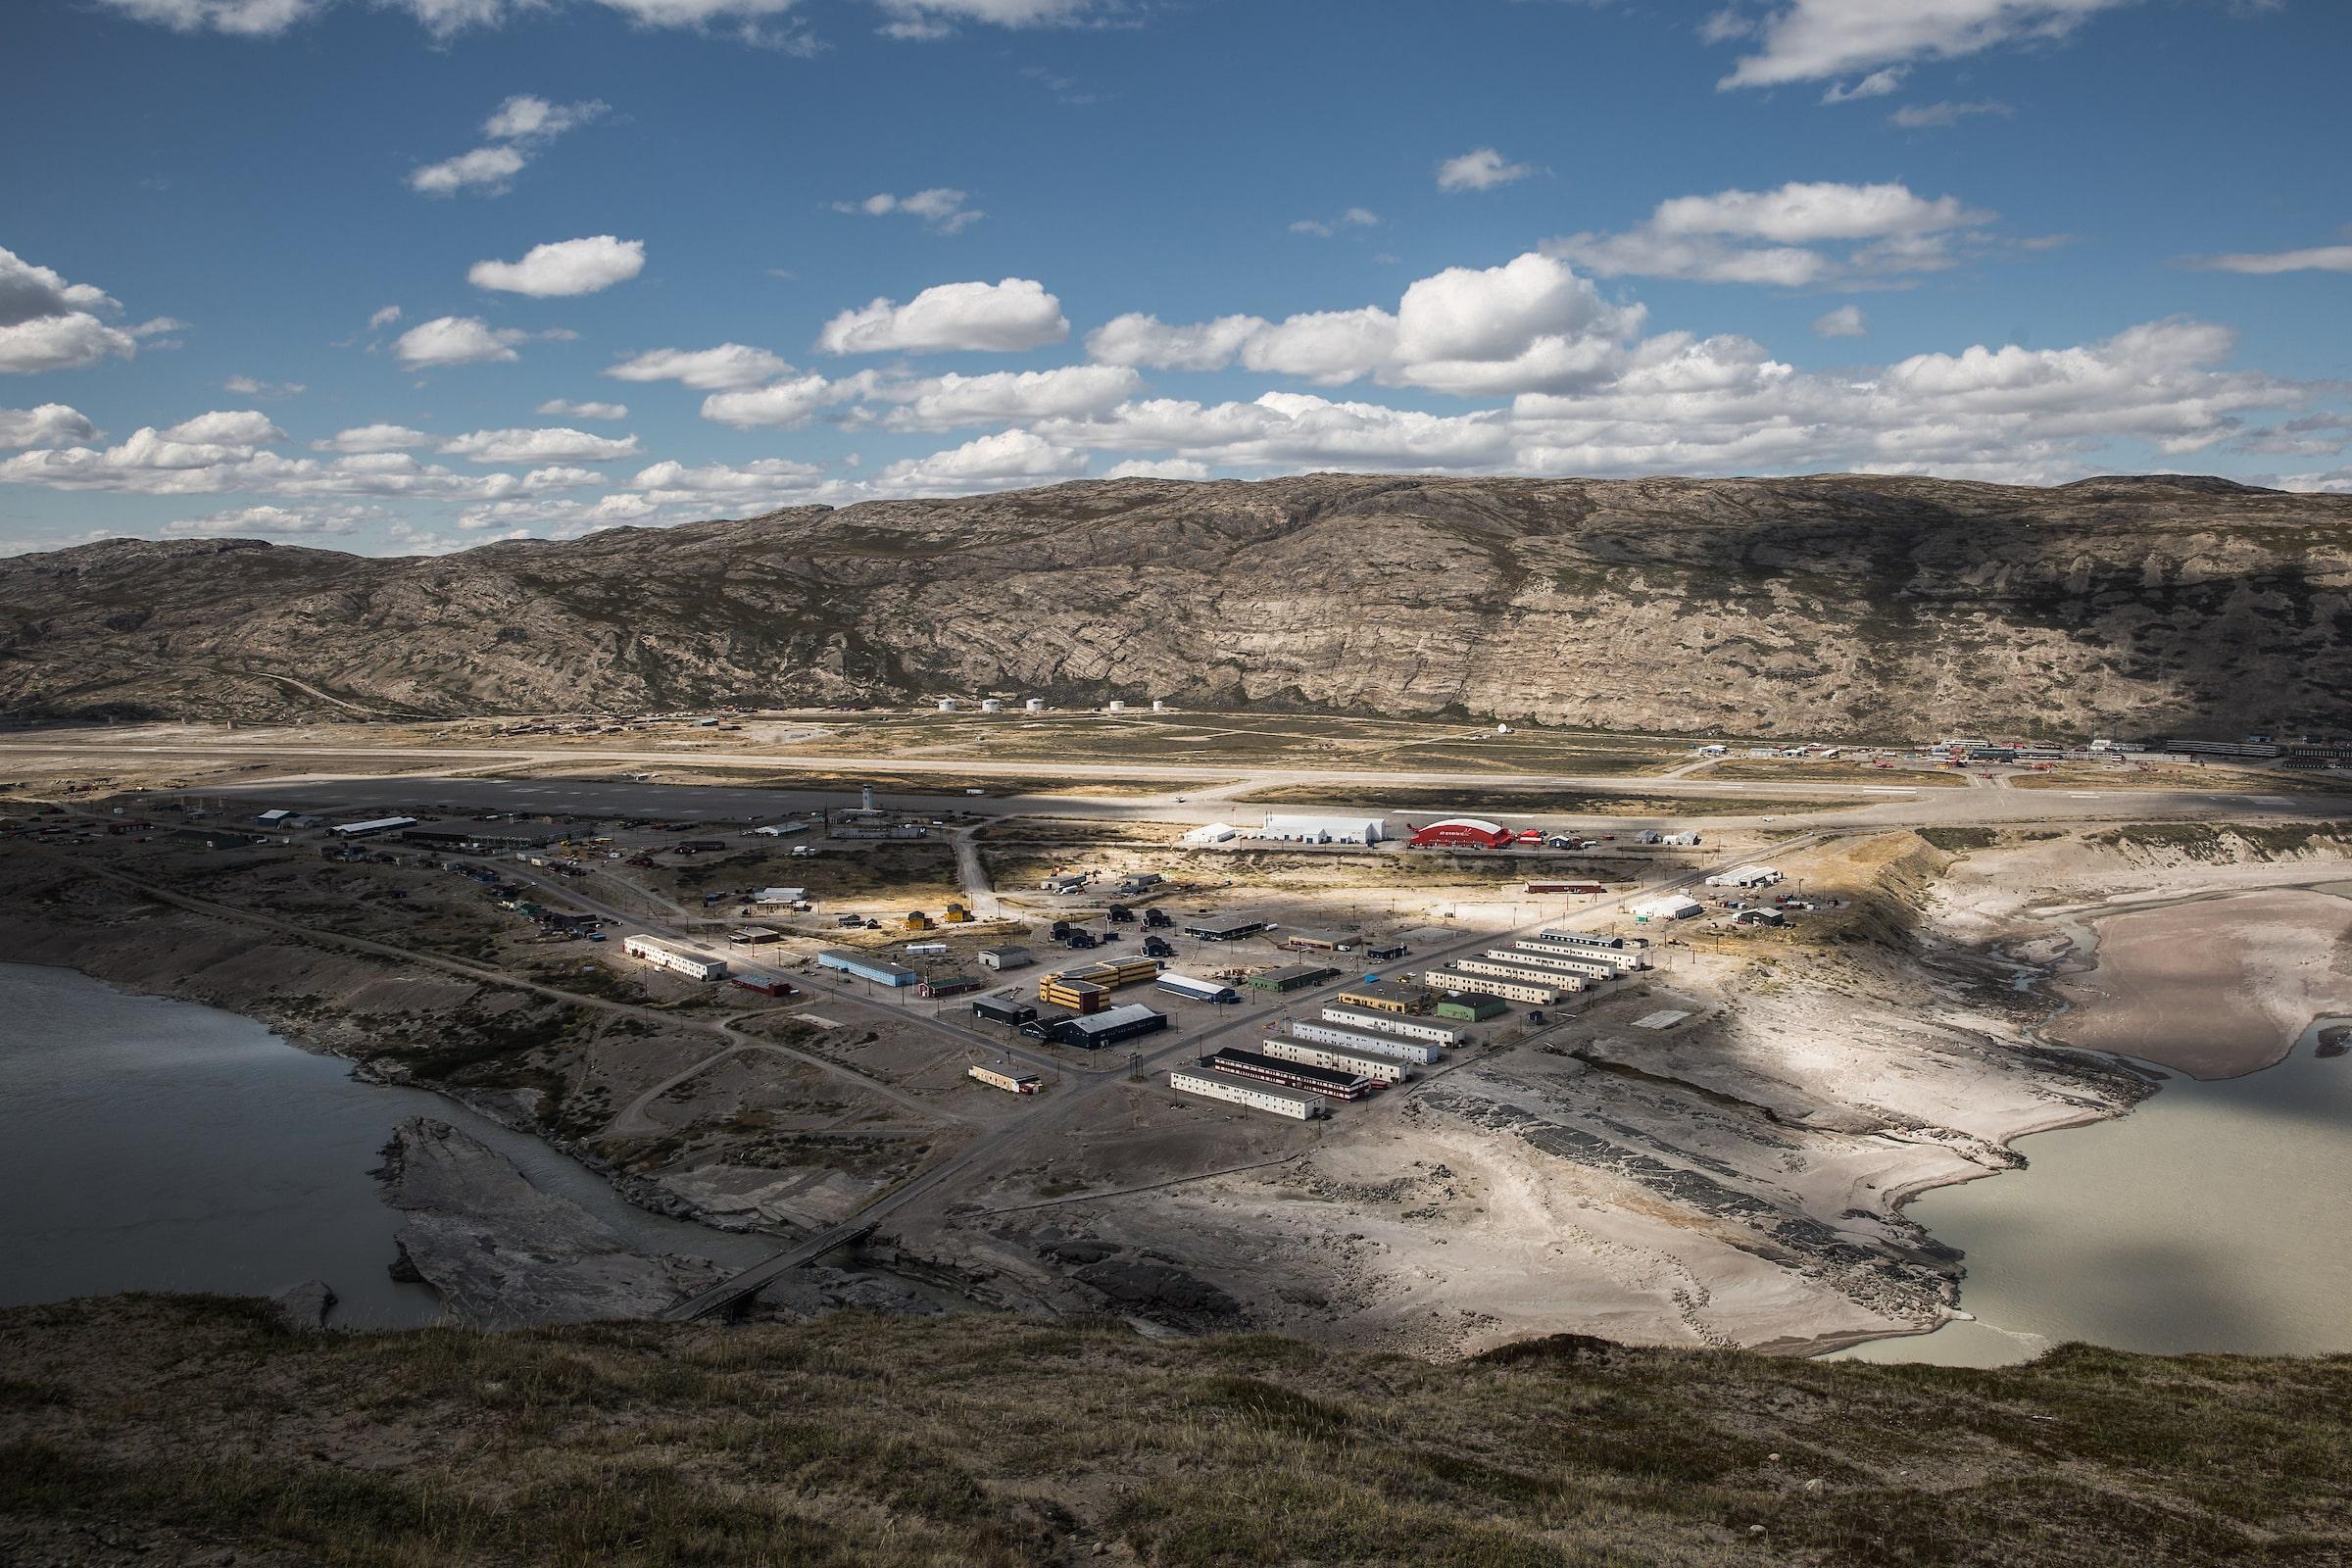 Summer overview of Kangerlussuaq in Greenland. Photo by Mads Pihl - Visit Greenland